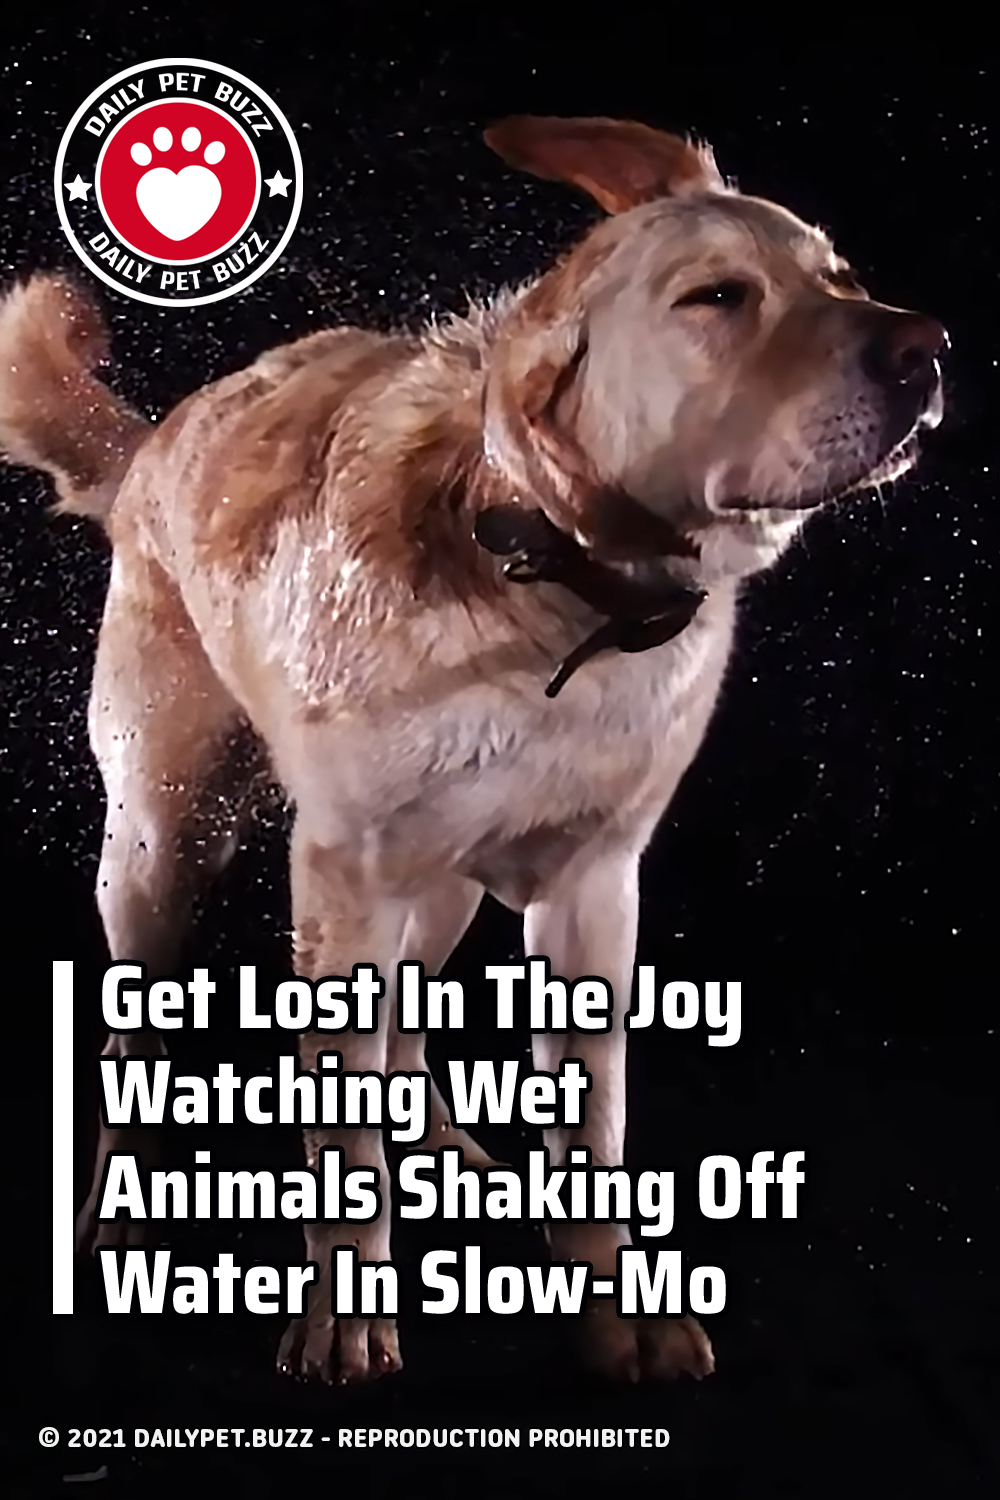 Get Lost In The Joy Watching Wet Animals Shaking Off Water In Slow-Mo